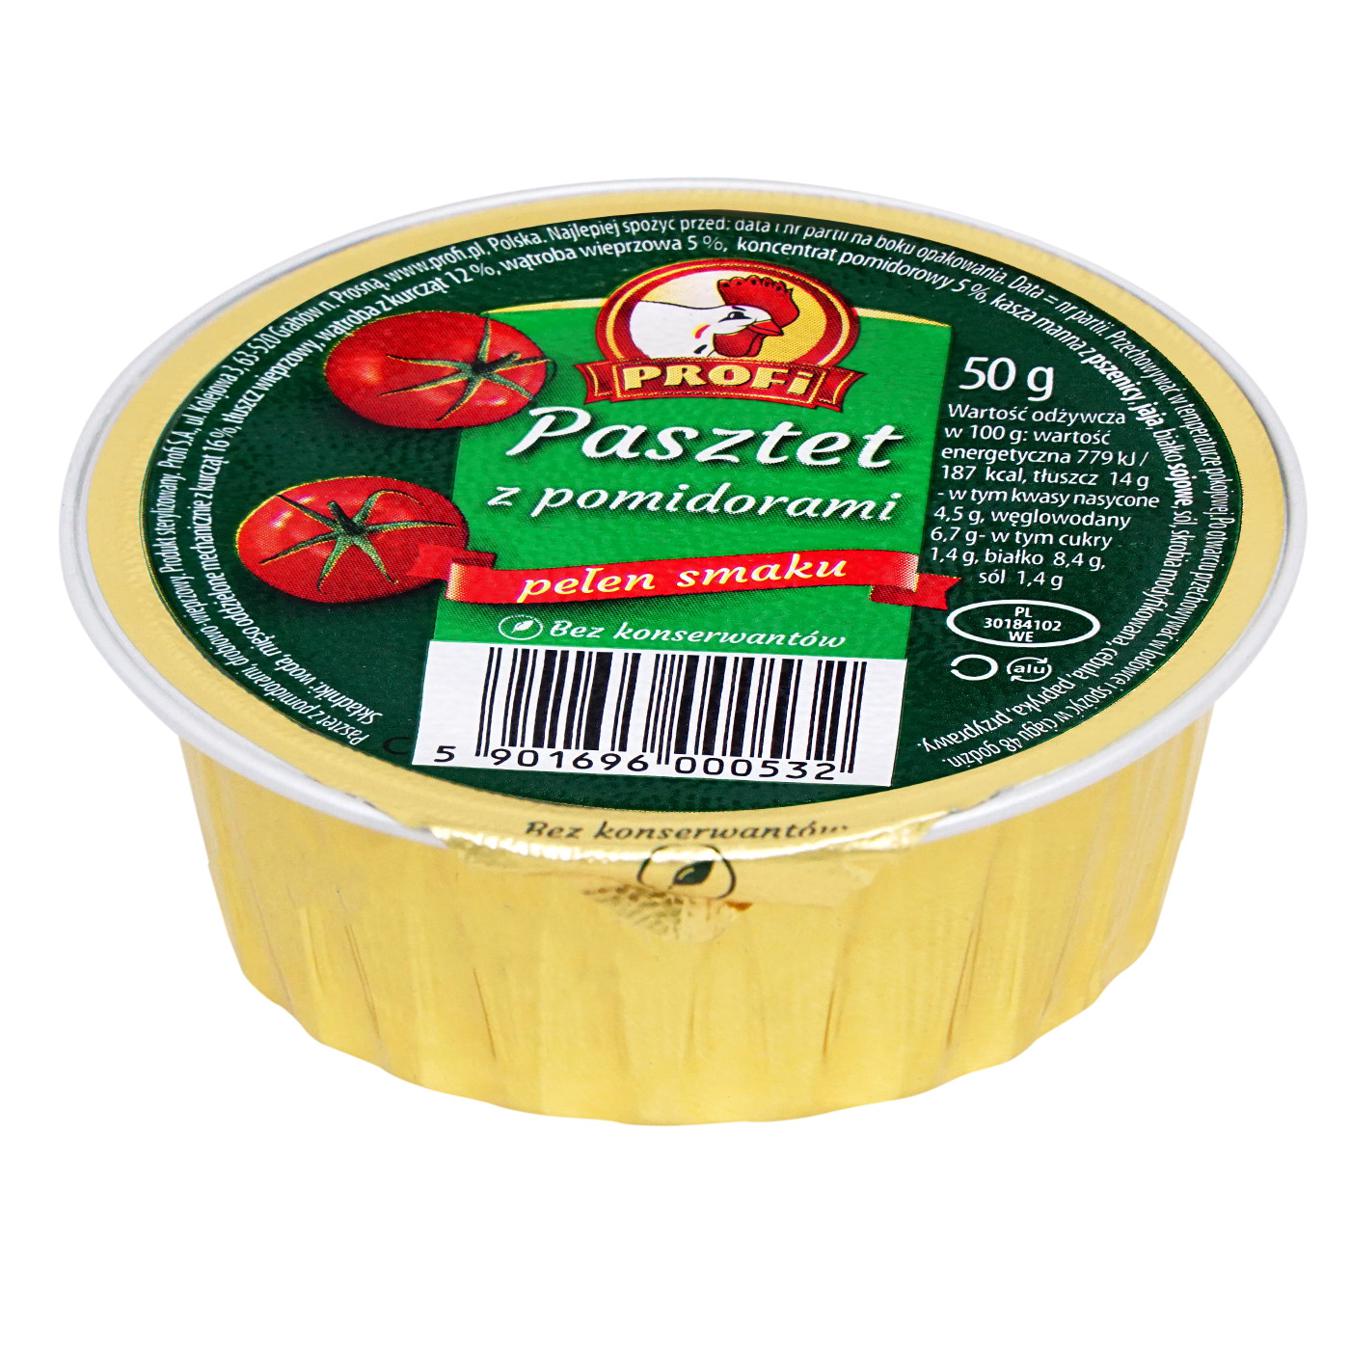 Profi pate with chicken, pork and tomatoes 50g